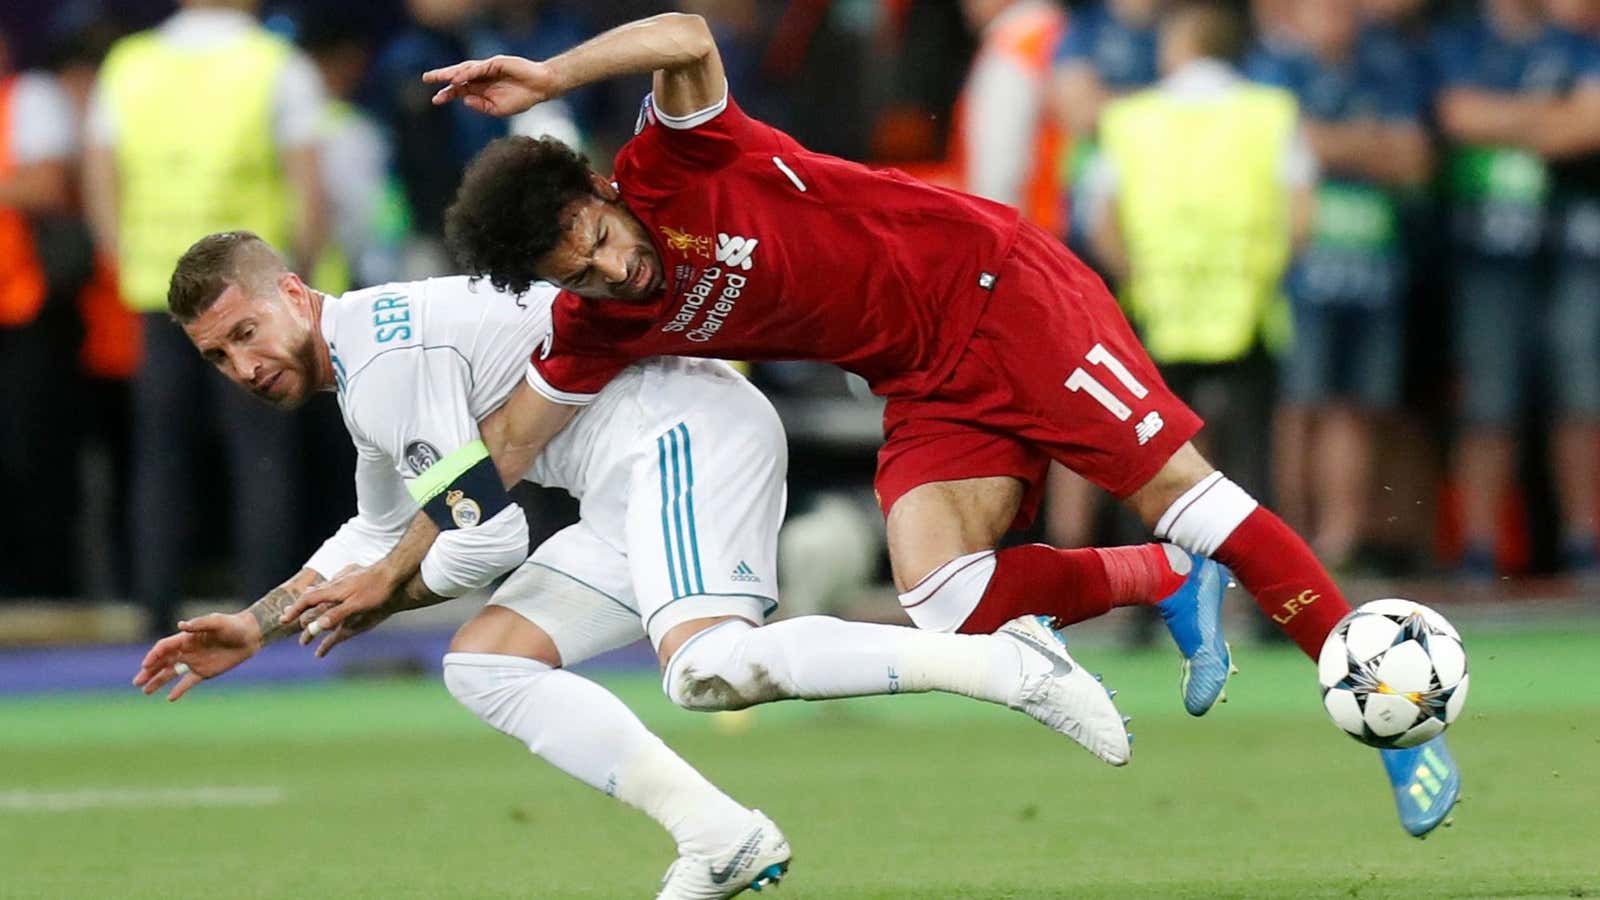 Egypt’s Mohamed Salah may miss the World Cup after dislocating his shoulder when fouled by Sergio Ramos.